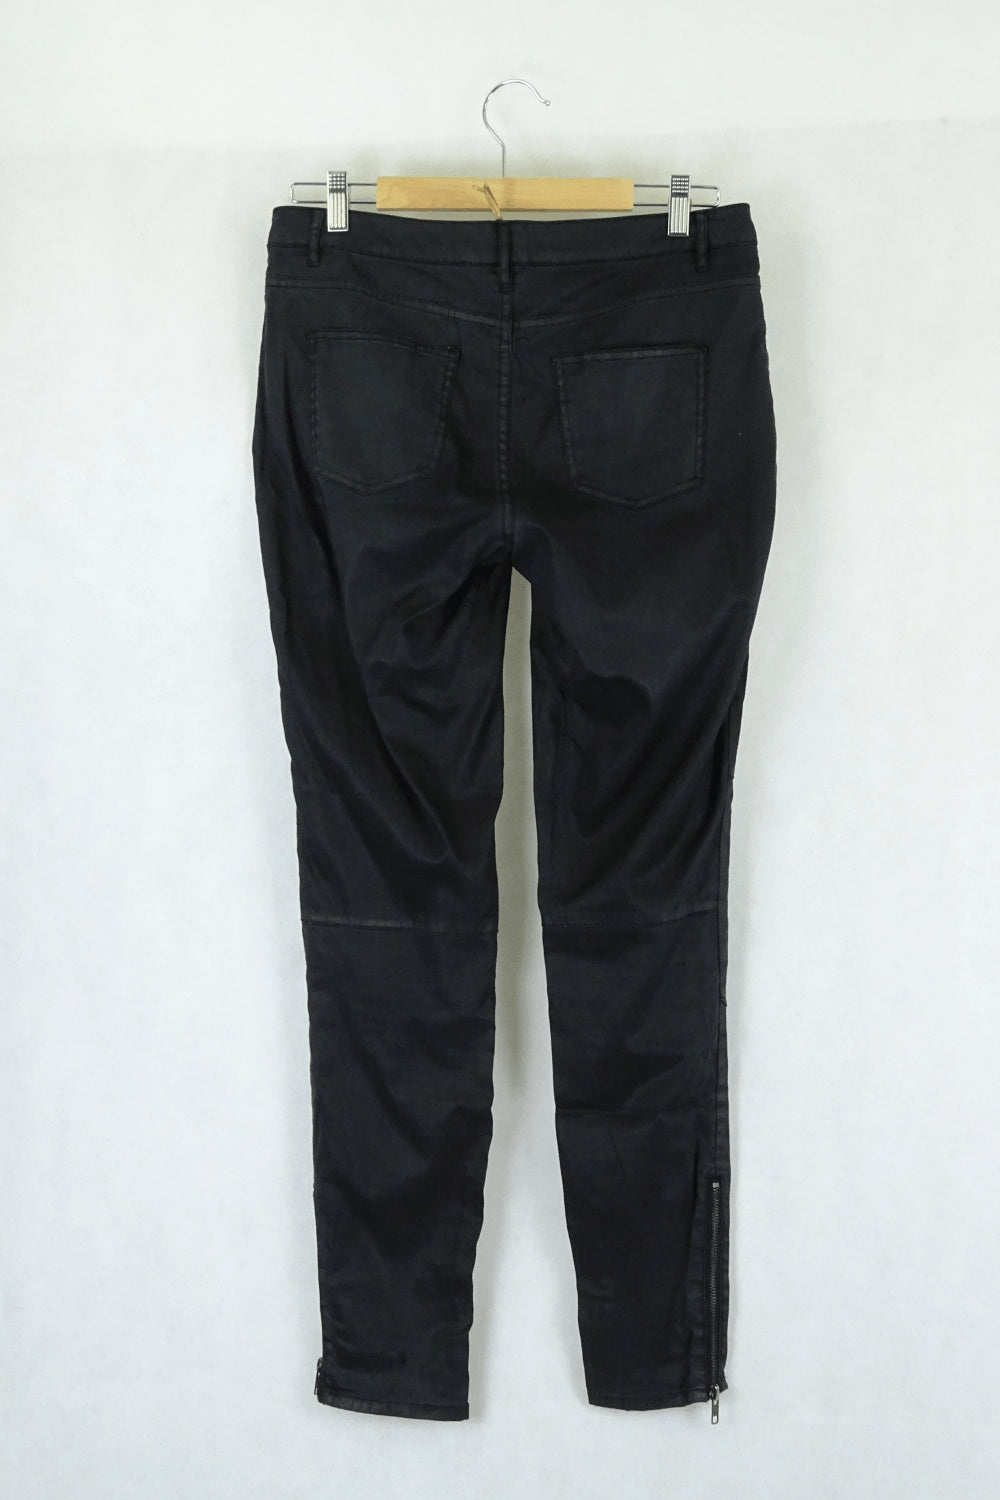 Country Road Black Wet Leather Jeans 10